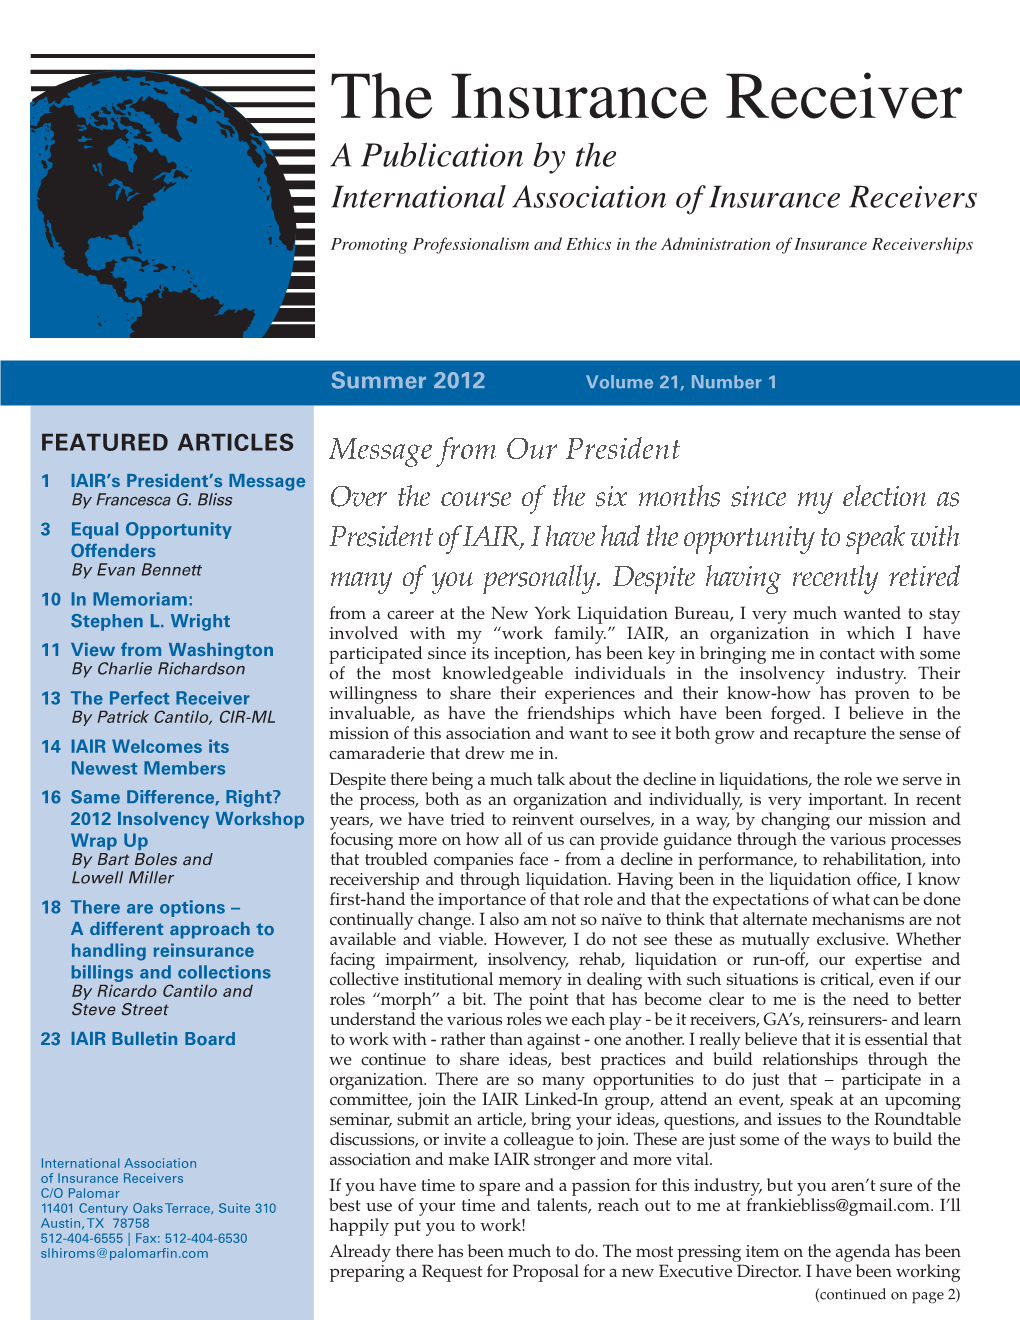 The Insurance Receiver Is Intended to Provide Readers with Information on and Provide a Forum for Opinions and Discussions of Insurance Insolvency Topics